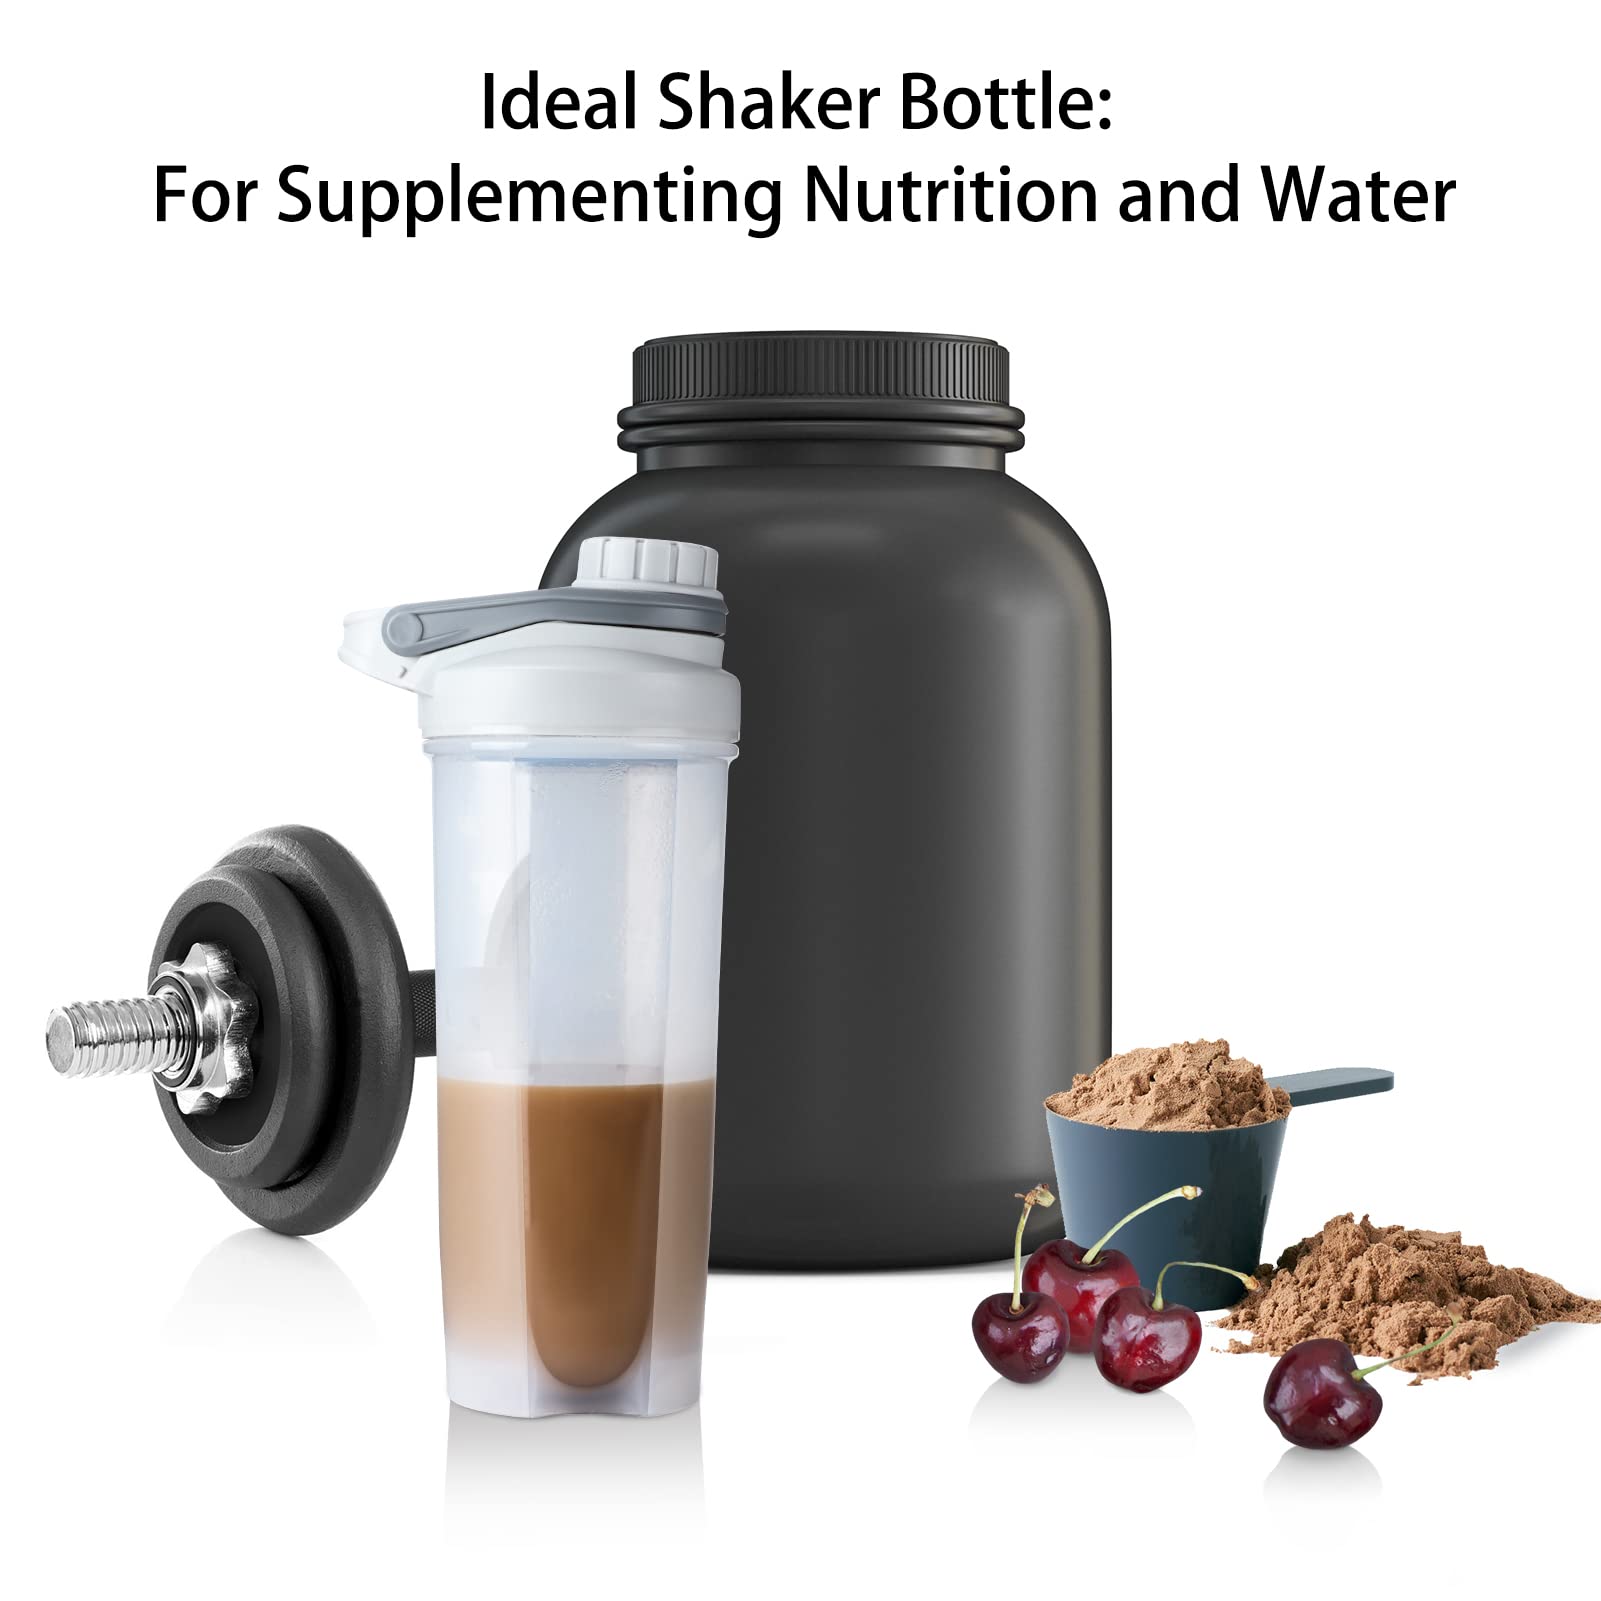 EYMPEU 2 Pack Shaker Bottle Work Out Dishwasher Safe BPA & Phthalate-free Leakproof. Solid Screw lid blender Cup Bottles for Protein Mixes 24oz, Clear